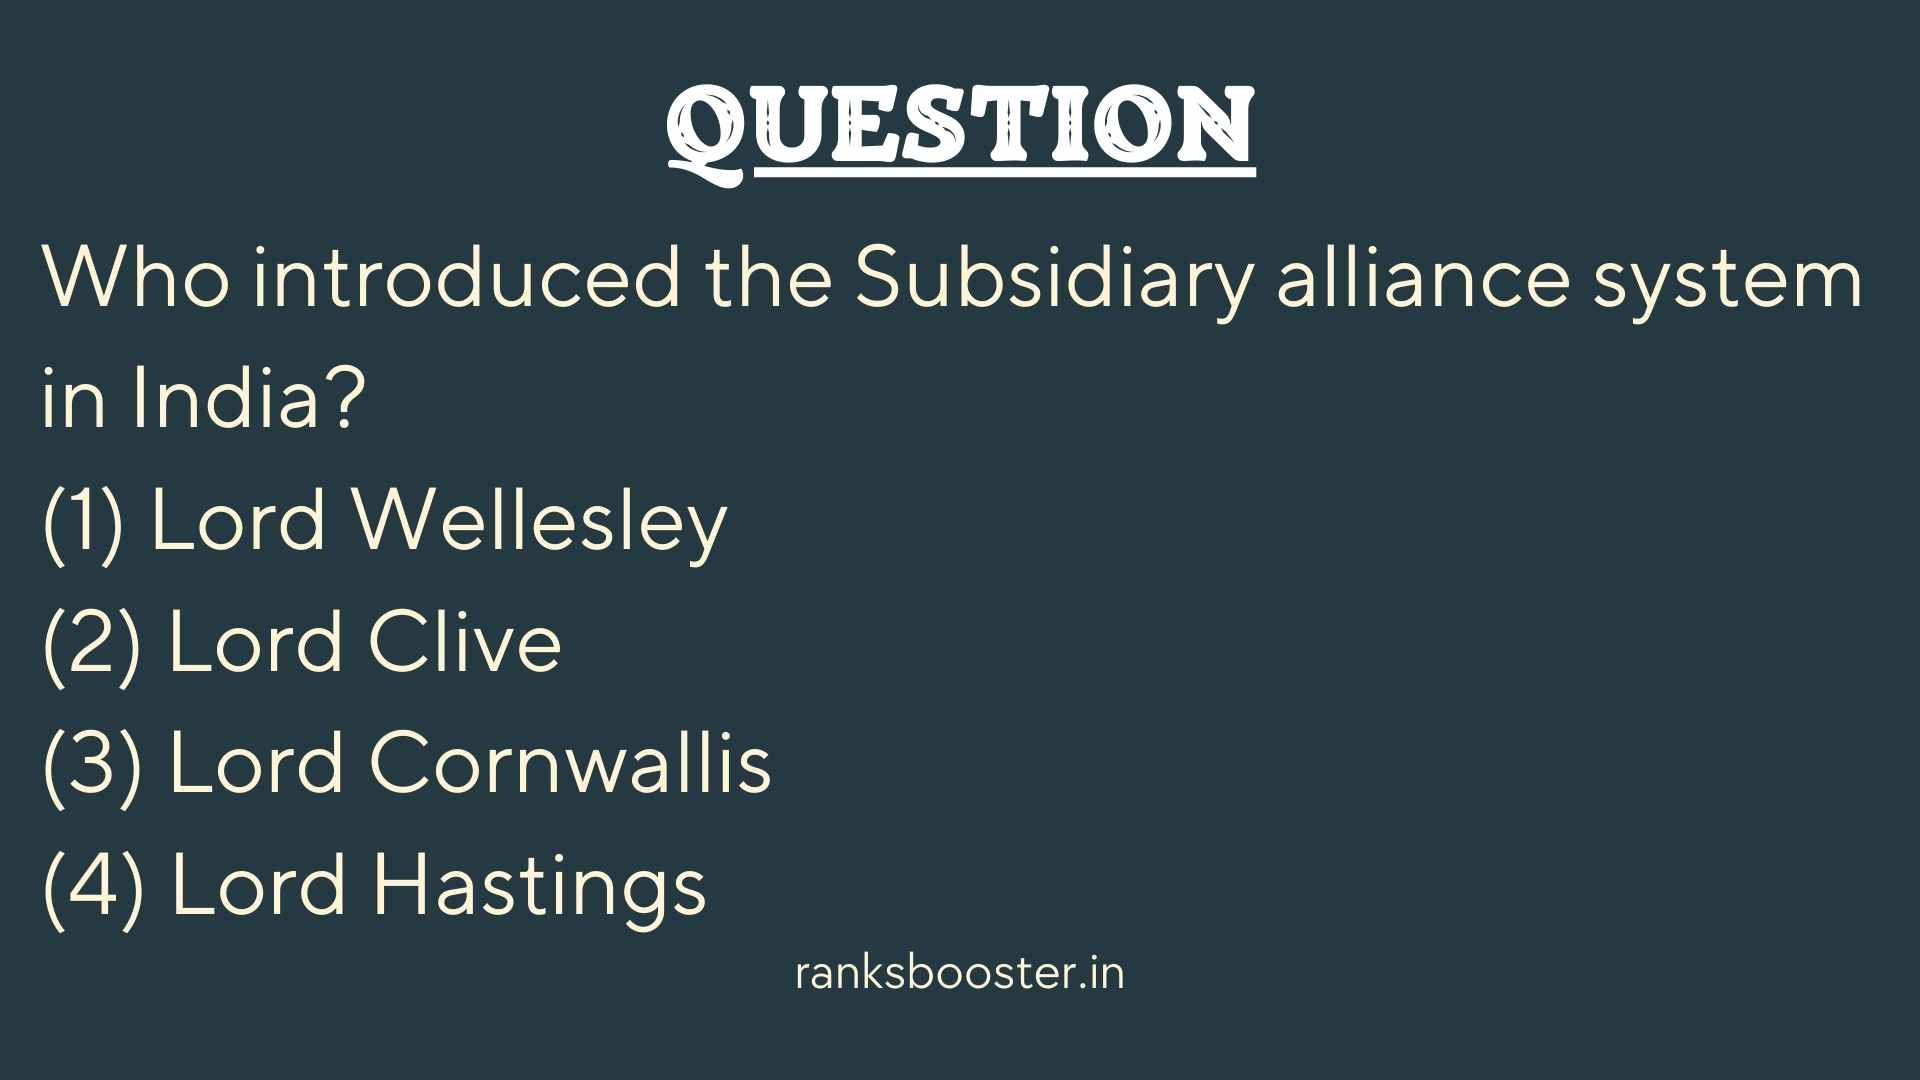 Who introduced the Subsidiary alliance system in India?